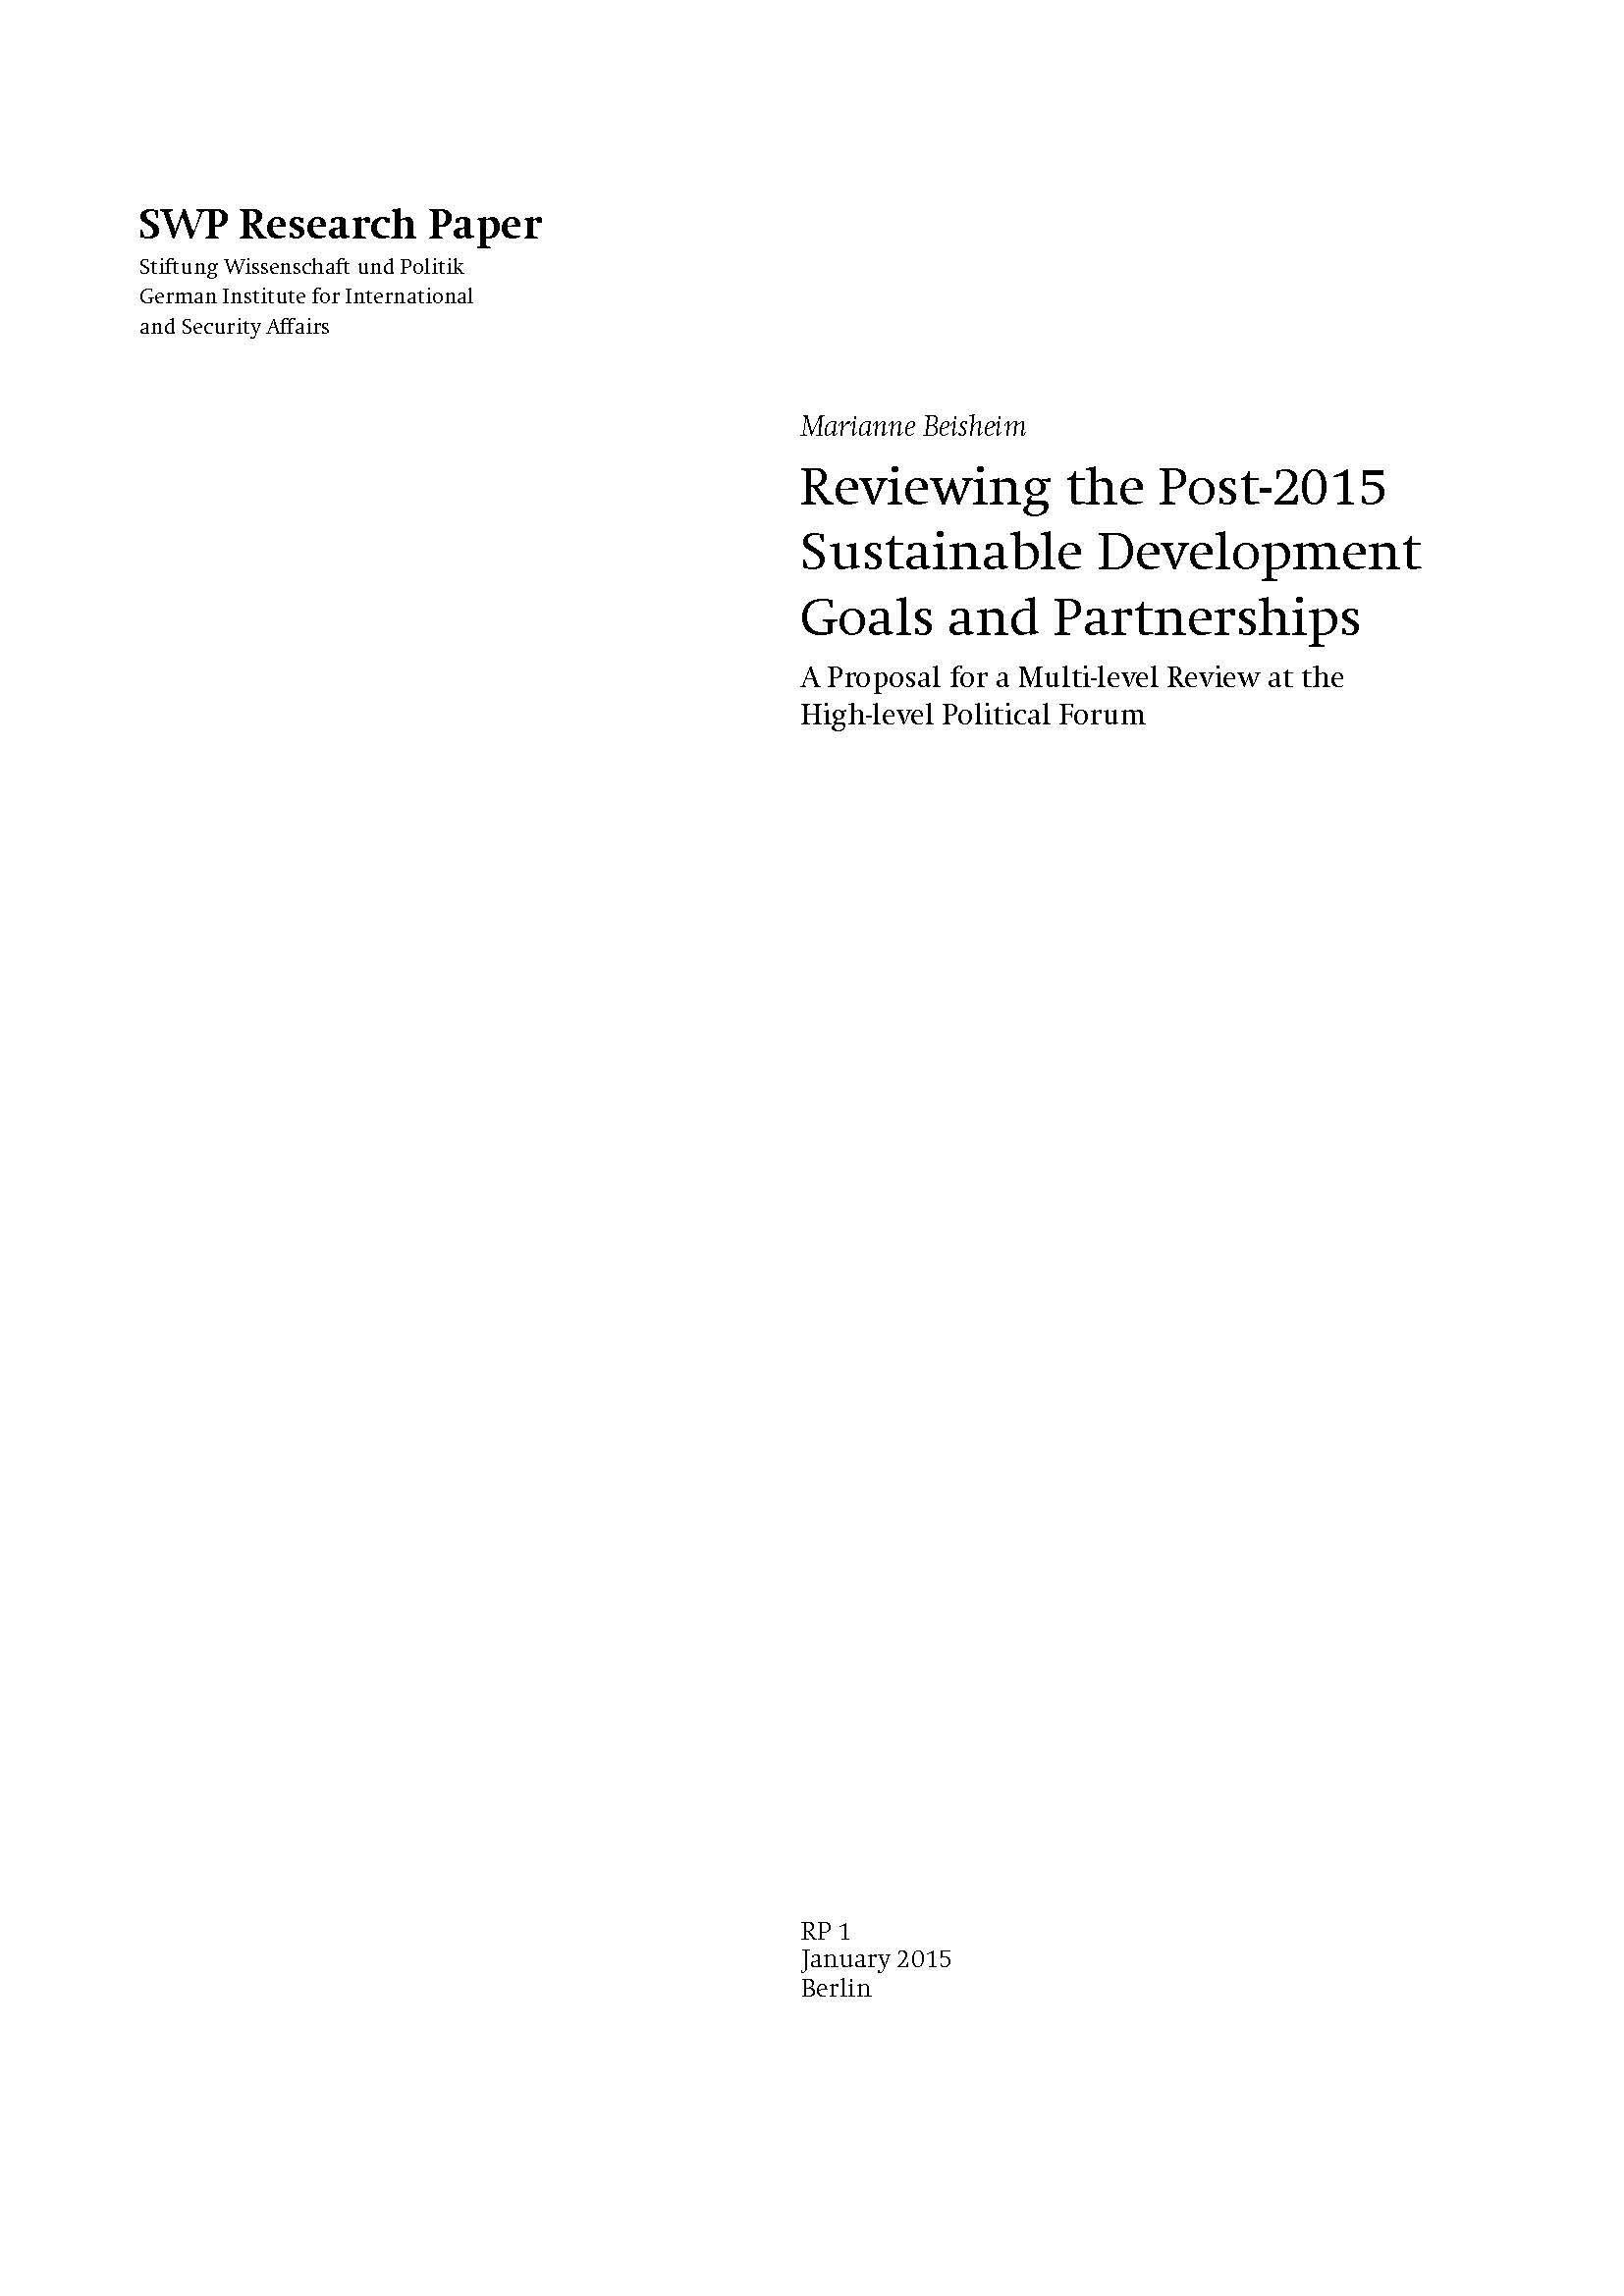 Reviewing the Post-2015 Sustainable Development Goals and Partnerships